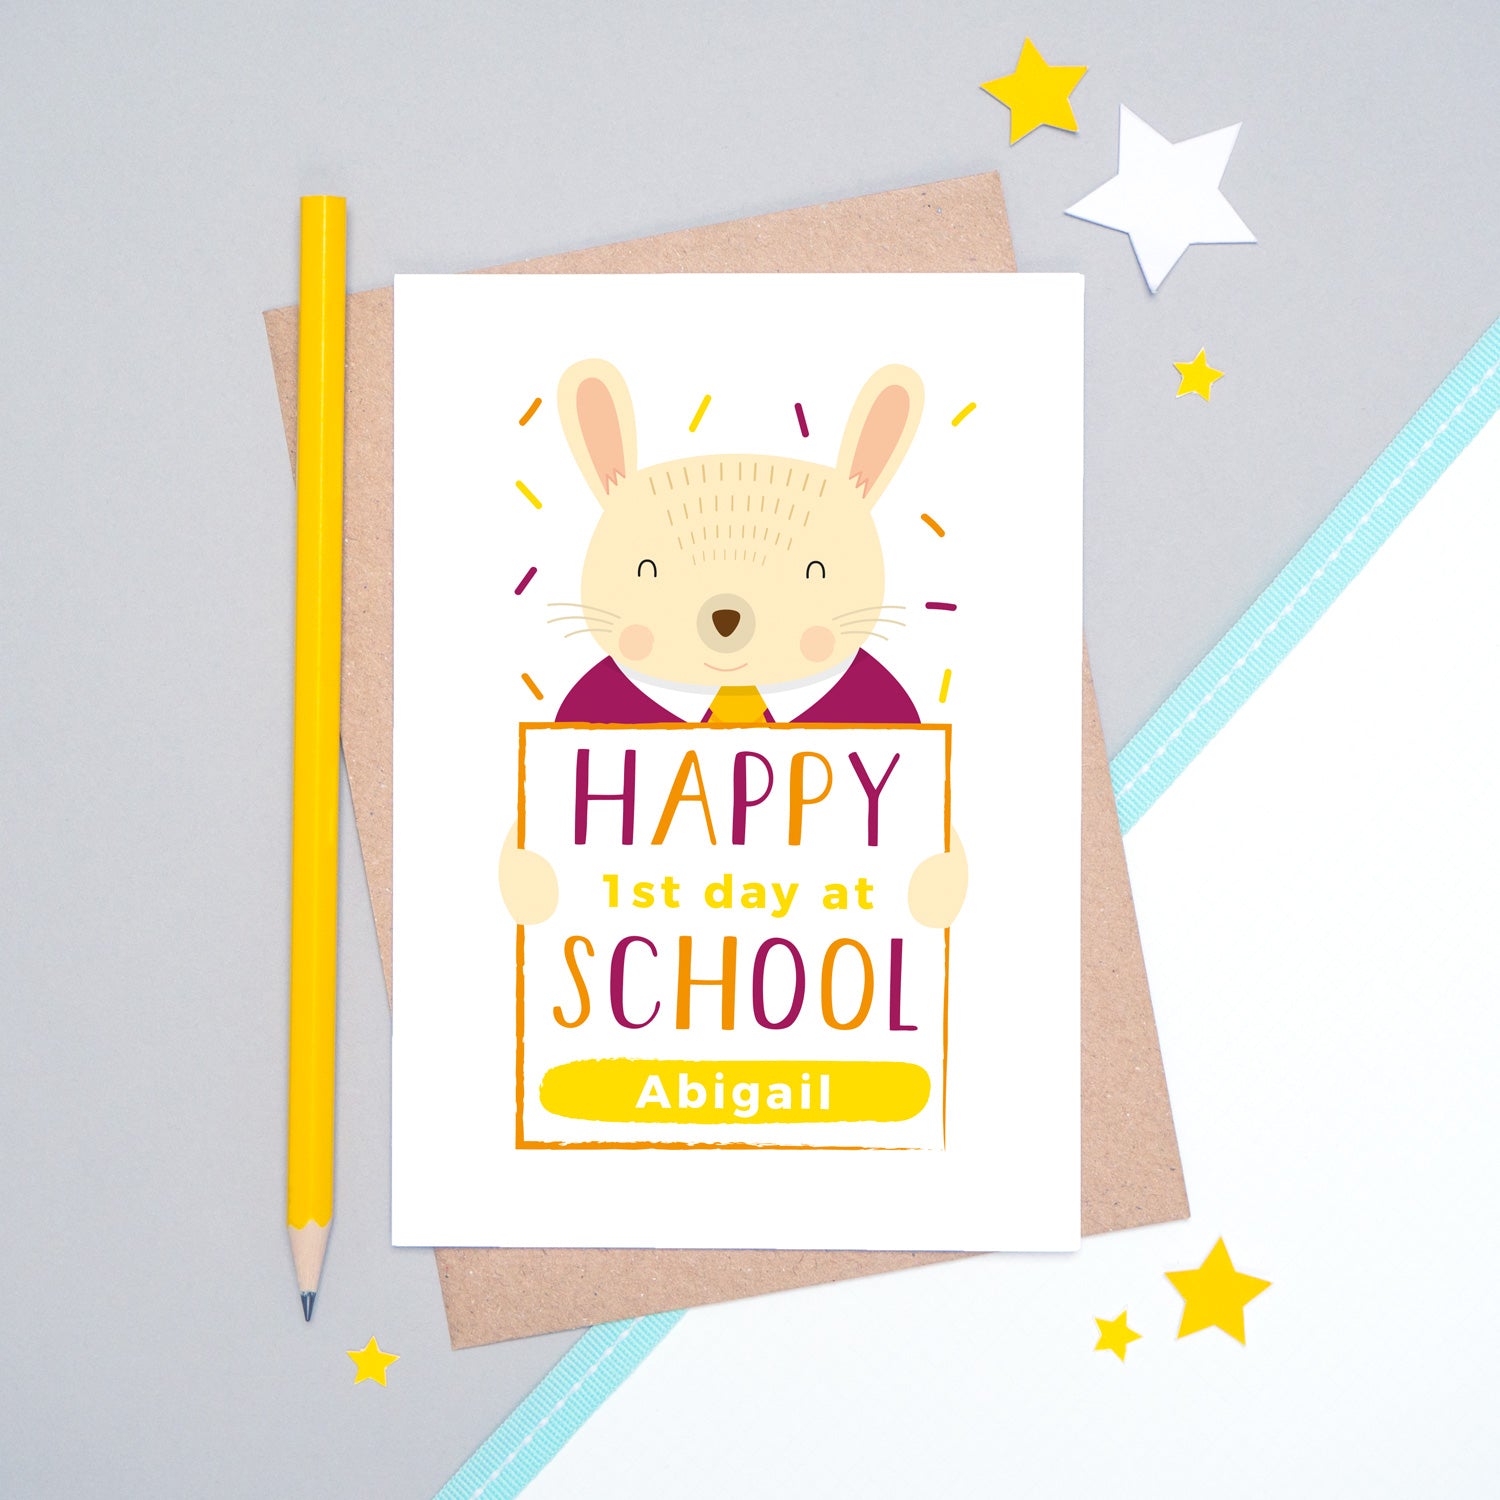 A happy 1st day at school personalised card featuring a friendly rabbit sat on a grey and white background.